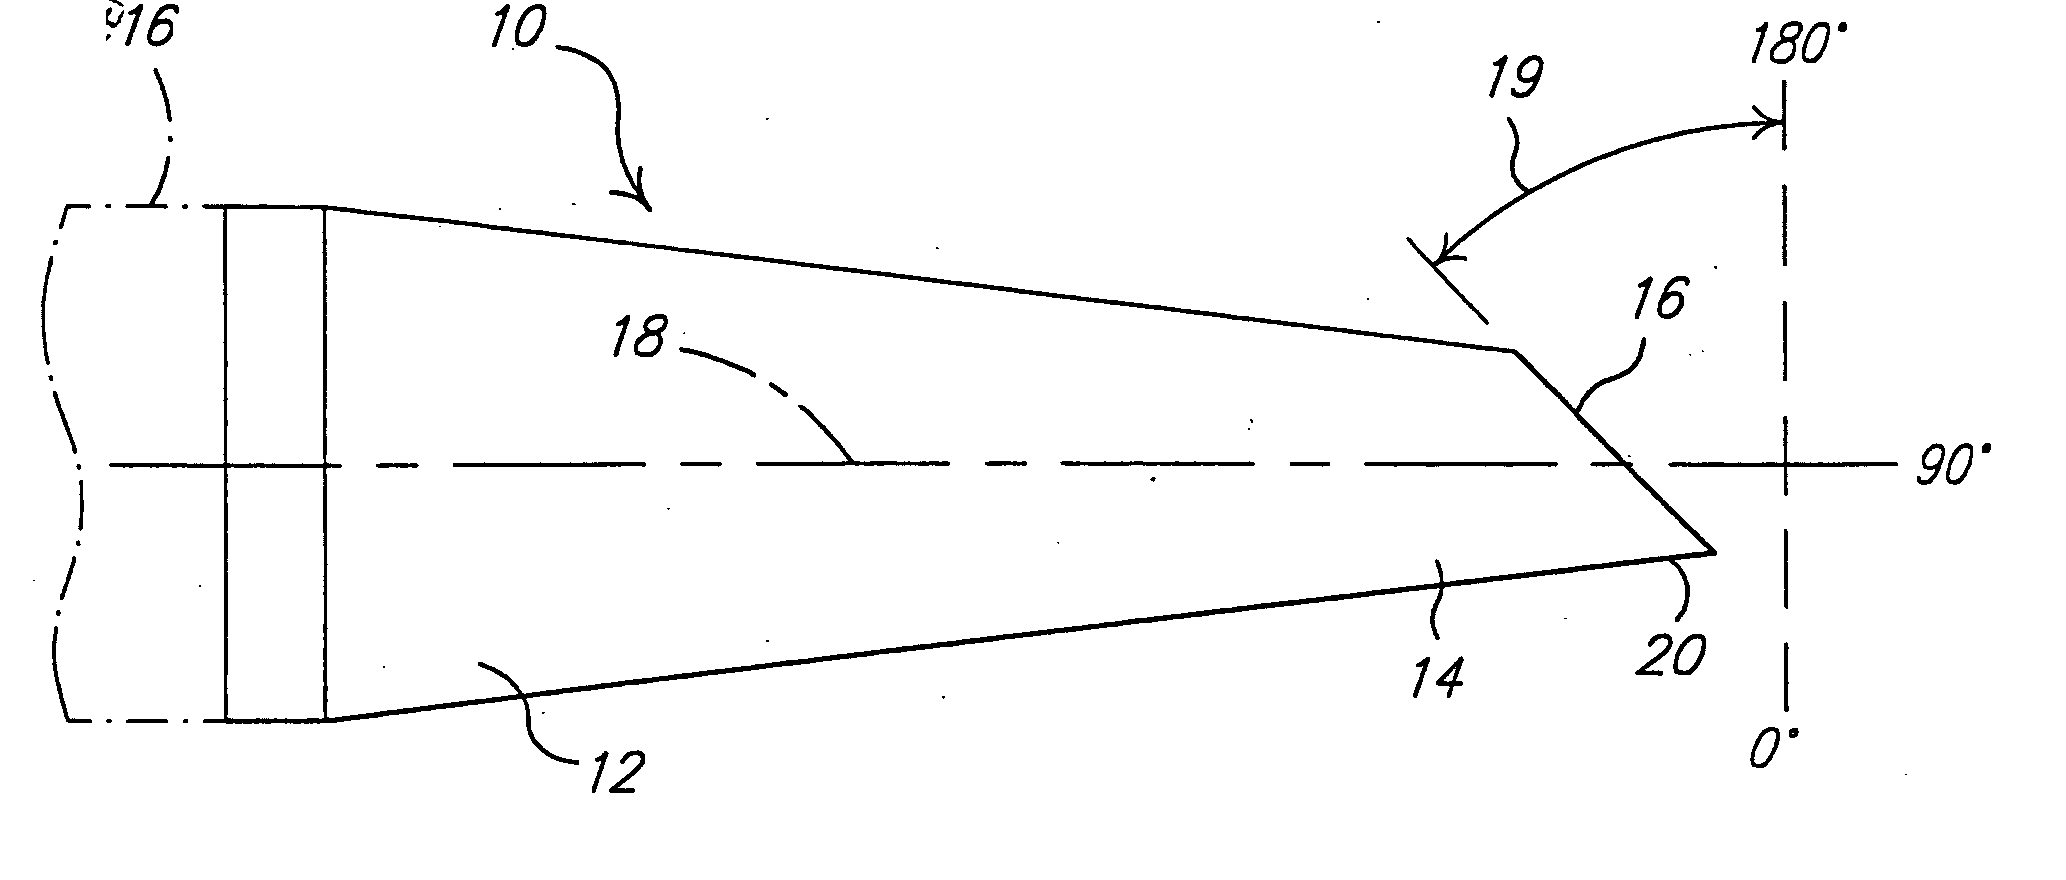 Apparatus and method for reduction jet noise from single jets